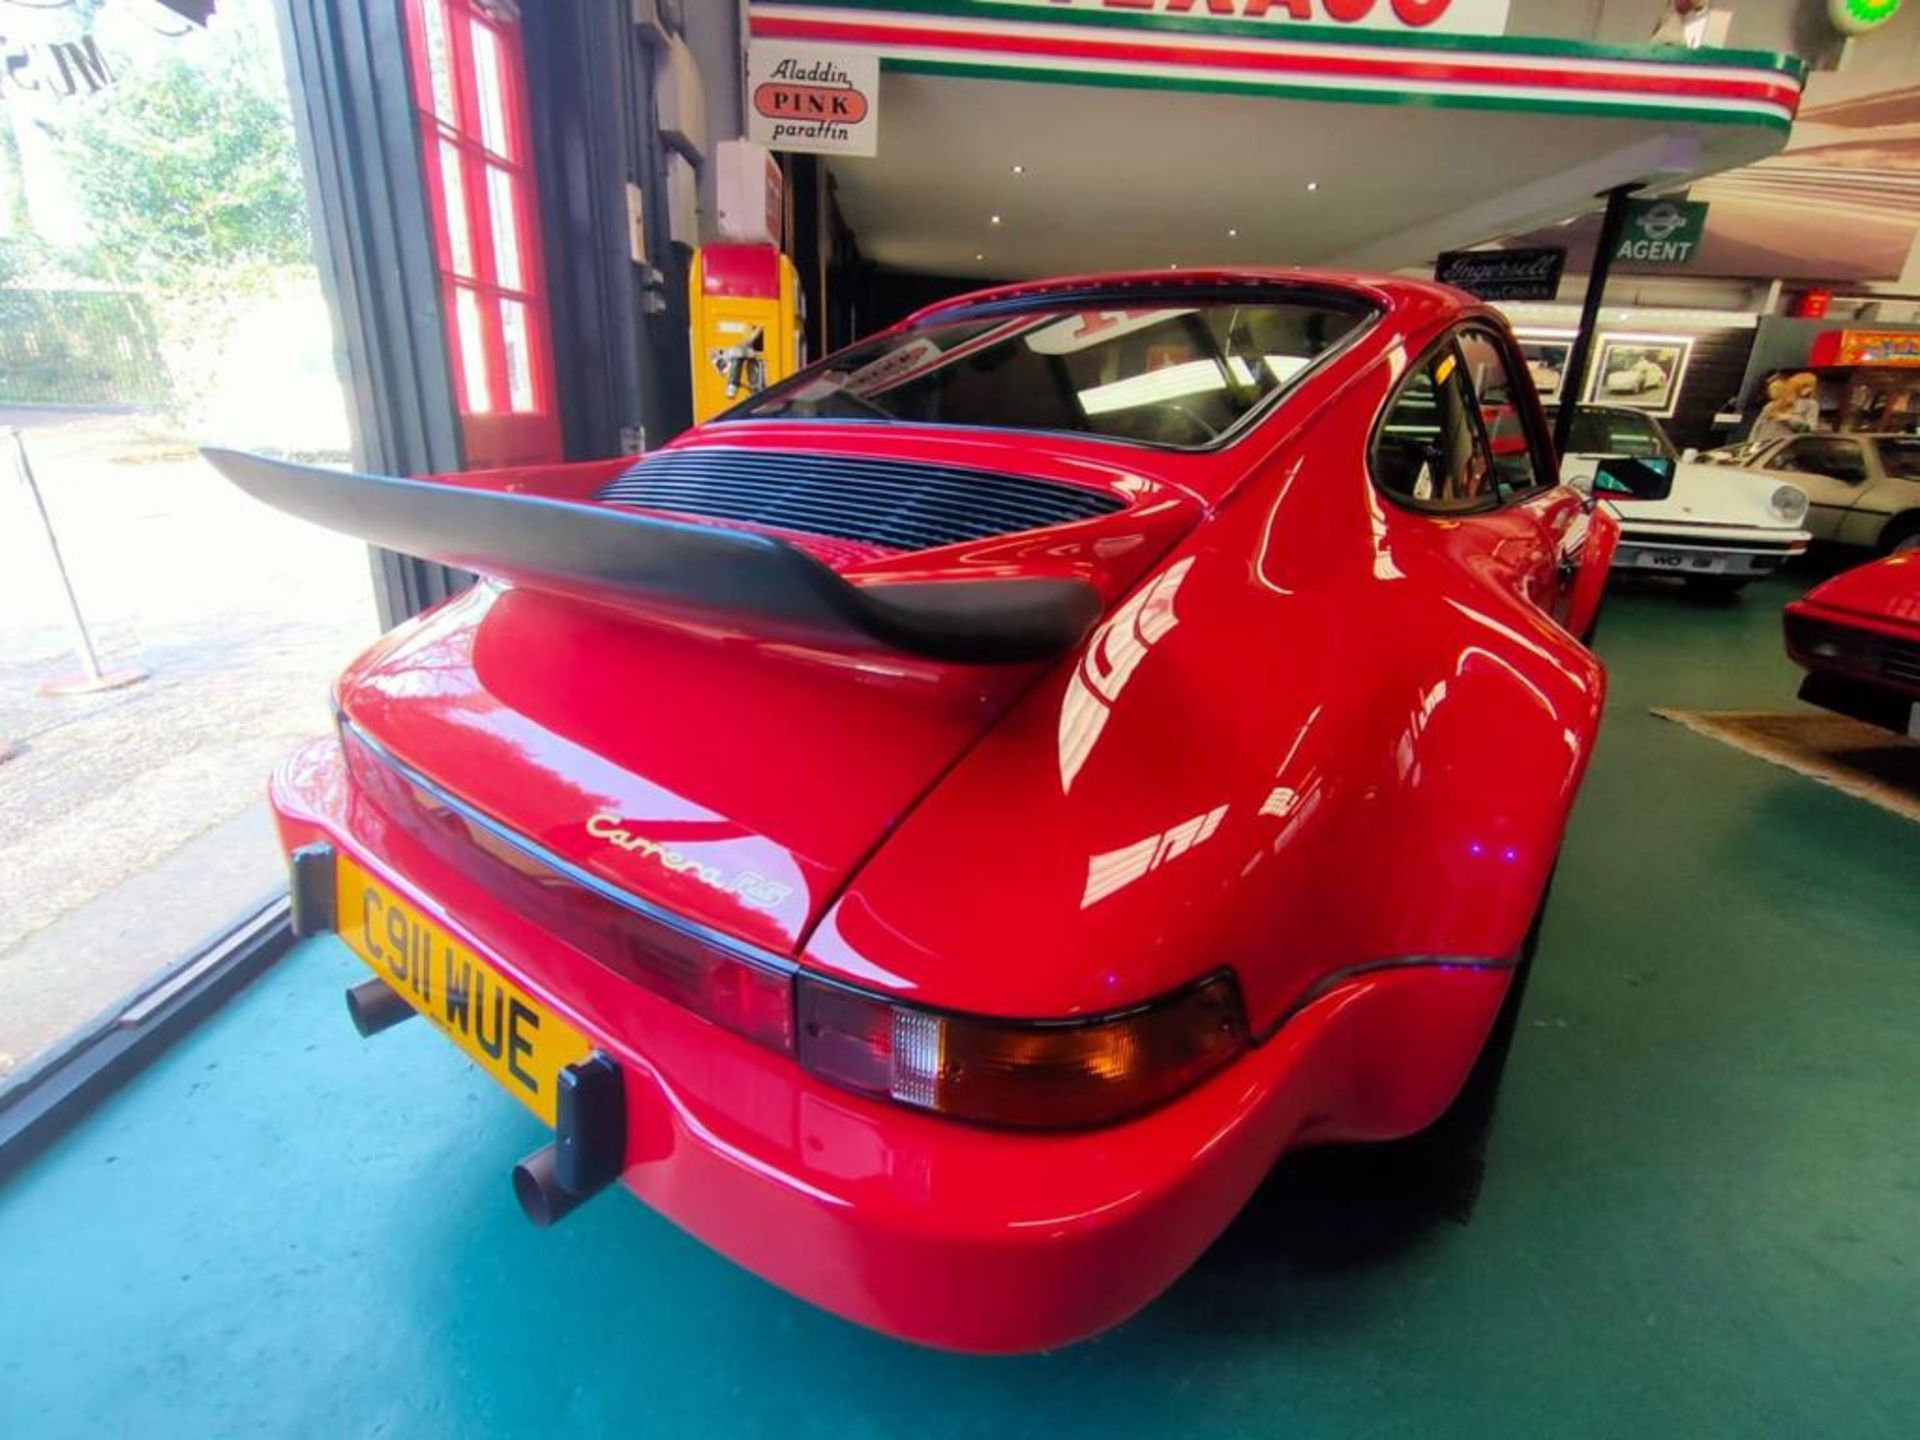 1980 Porsche 911 sc sport but has been fully rebuilt to be identical to a 1974 911 rsr *NO VAT* - Image 4 of 12